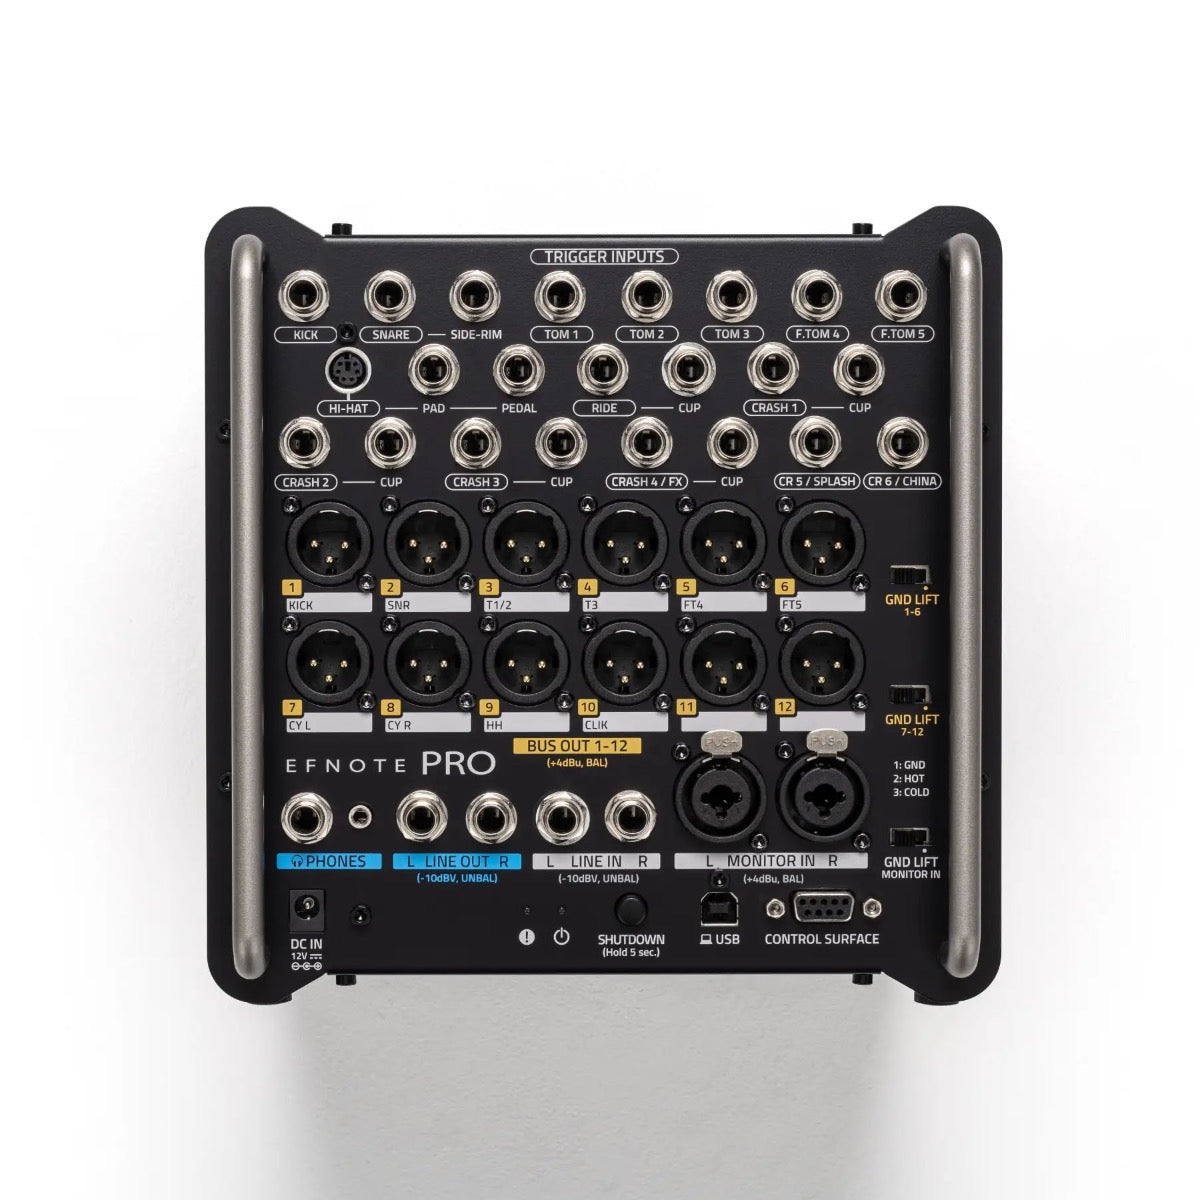 EFNOTE PRO Electronic Drum Module, View 2